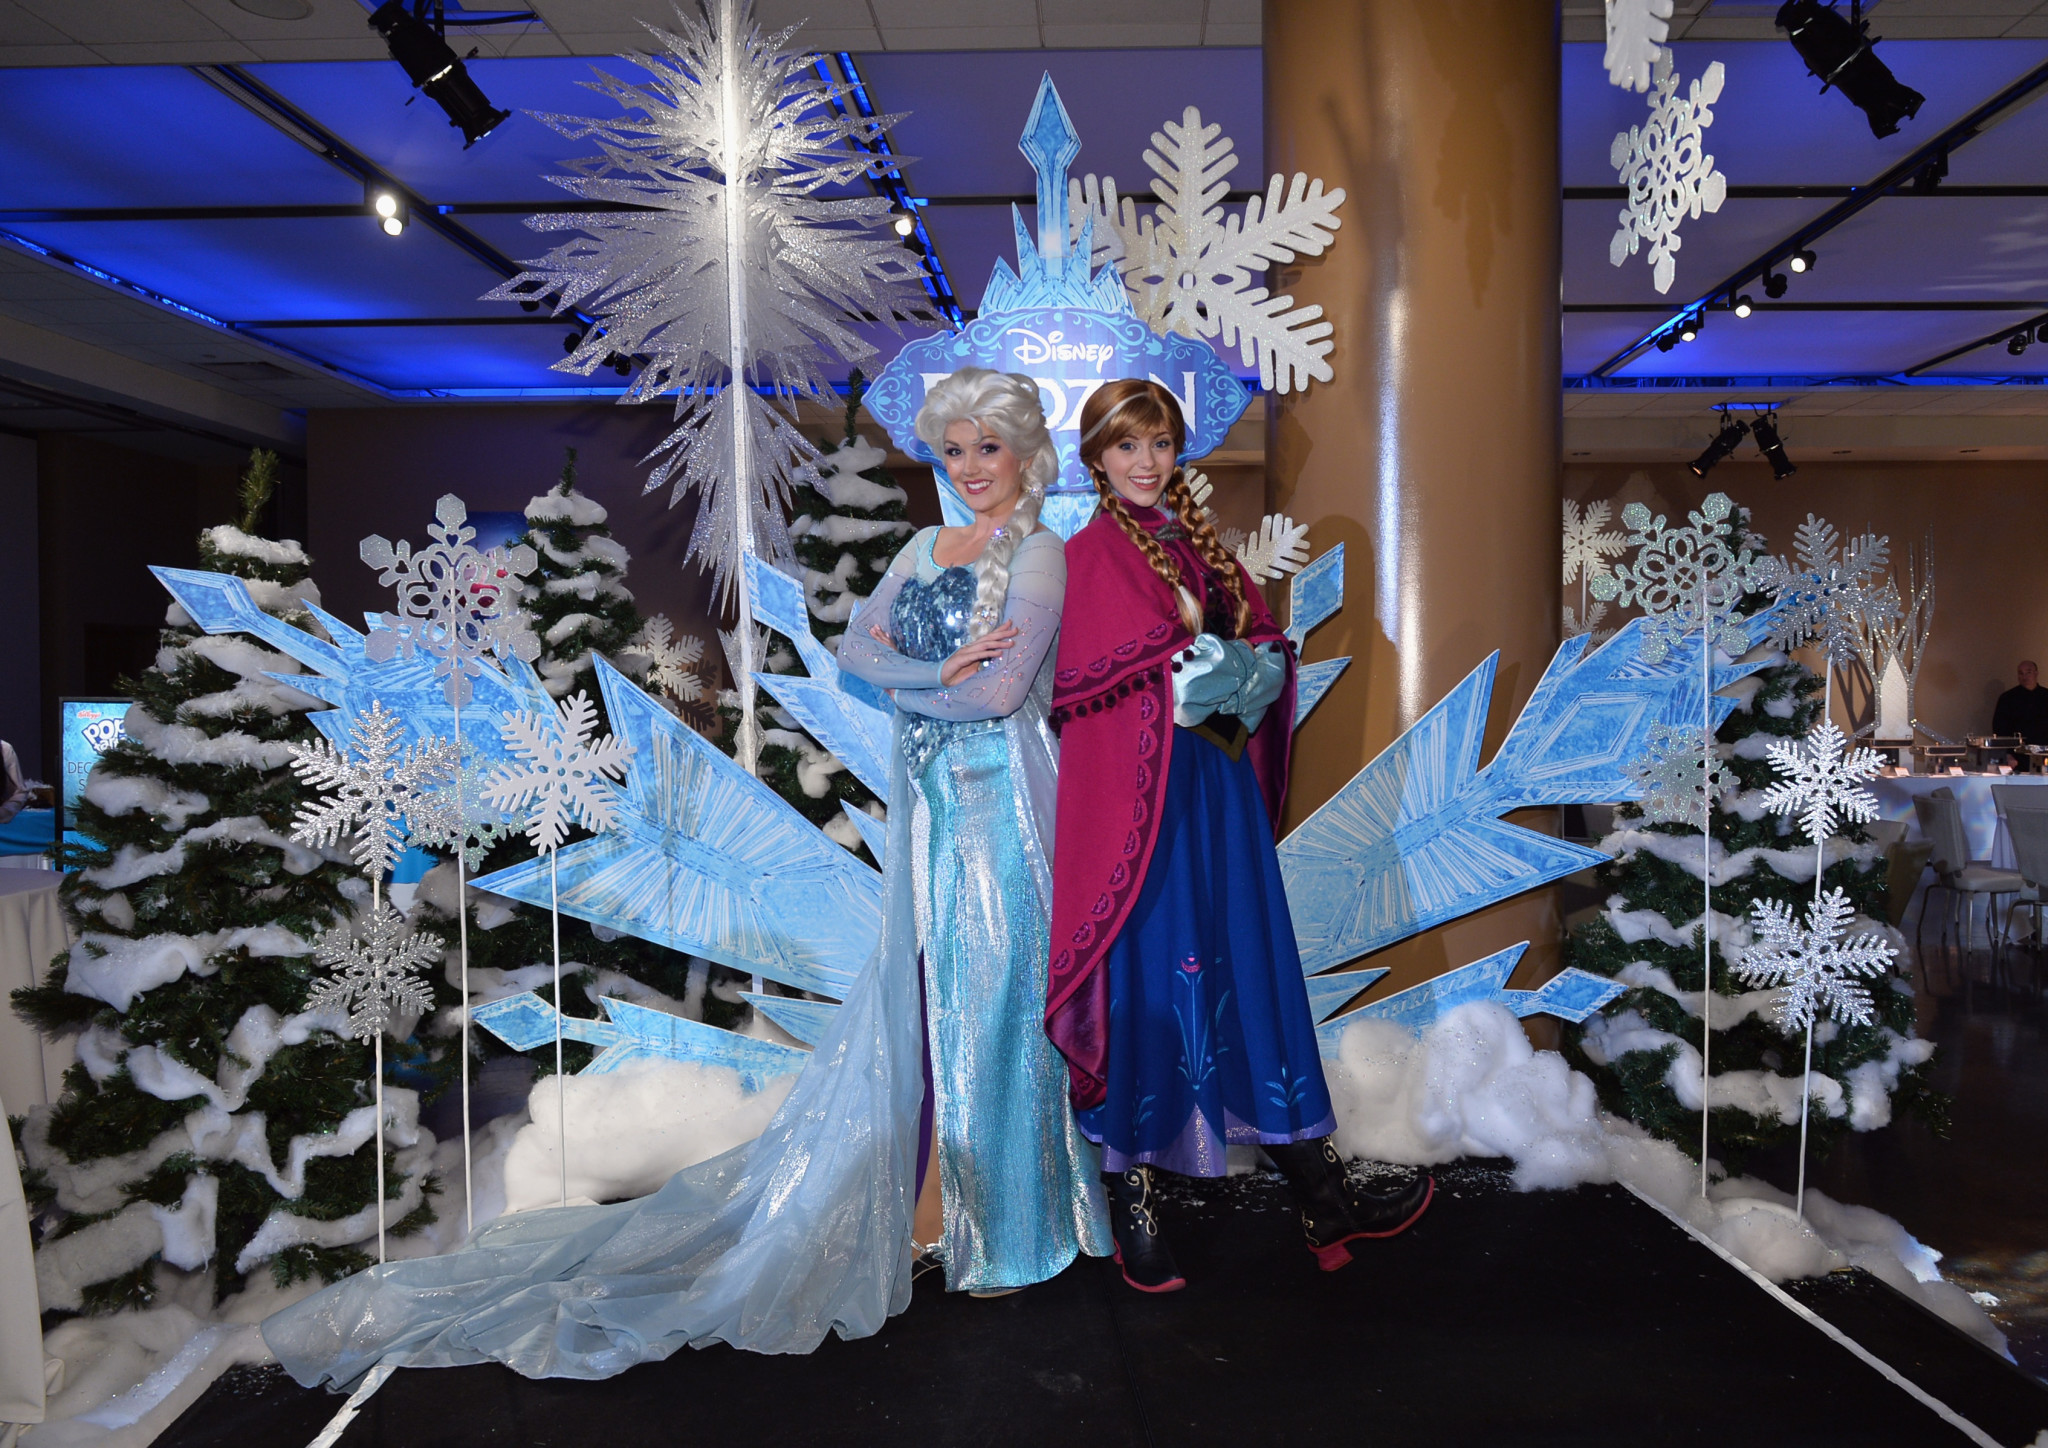 Are Anna and Elsa sailing away on the Disney Cruise Line?